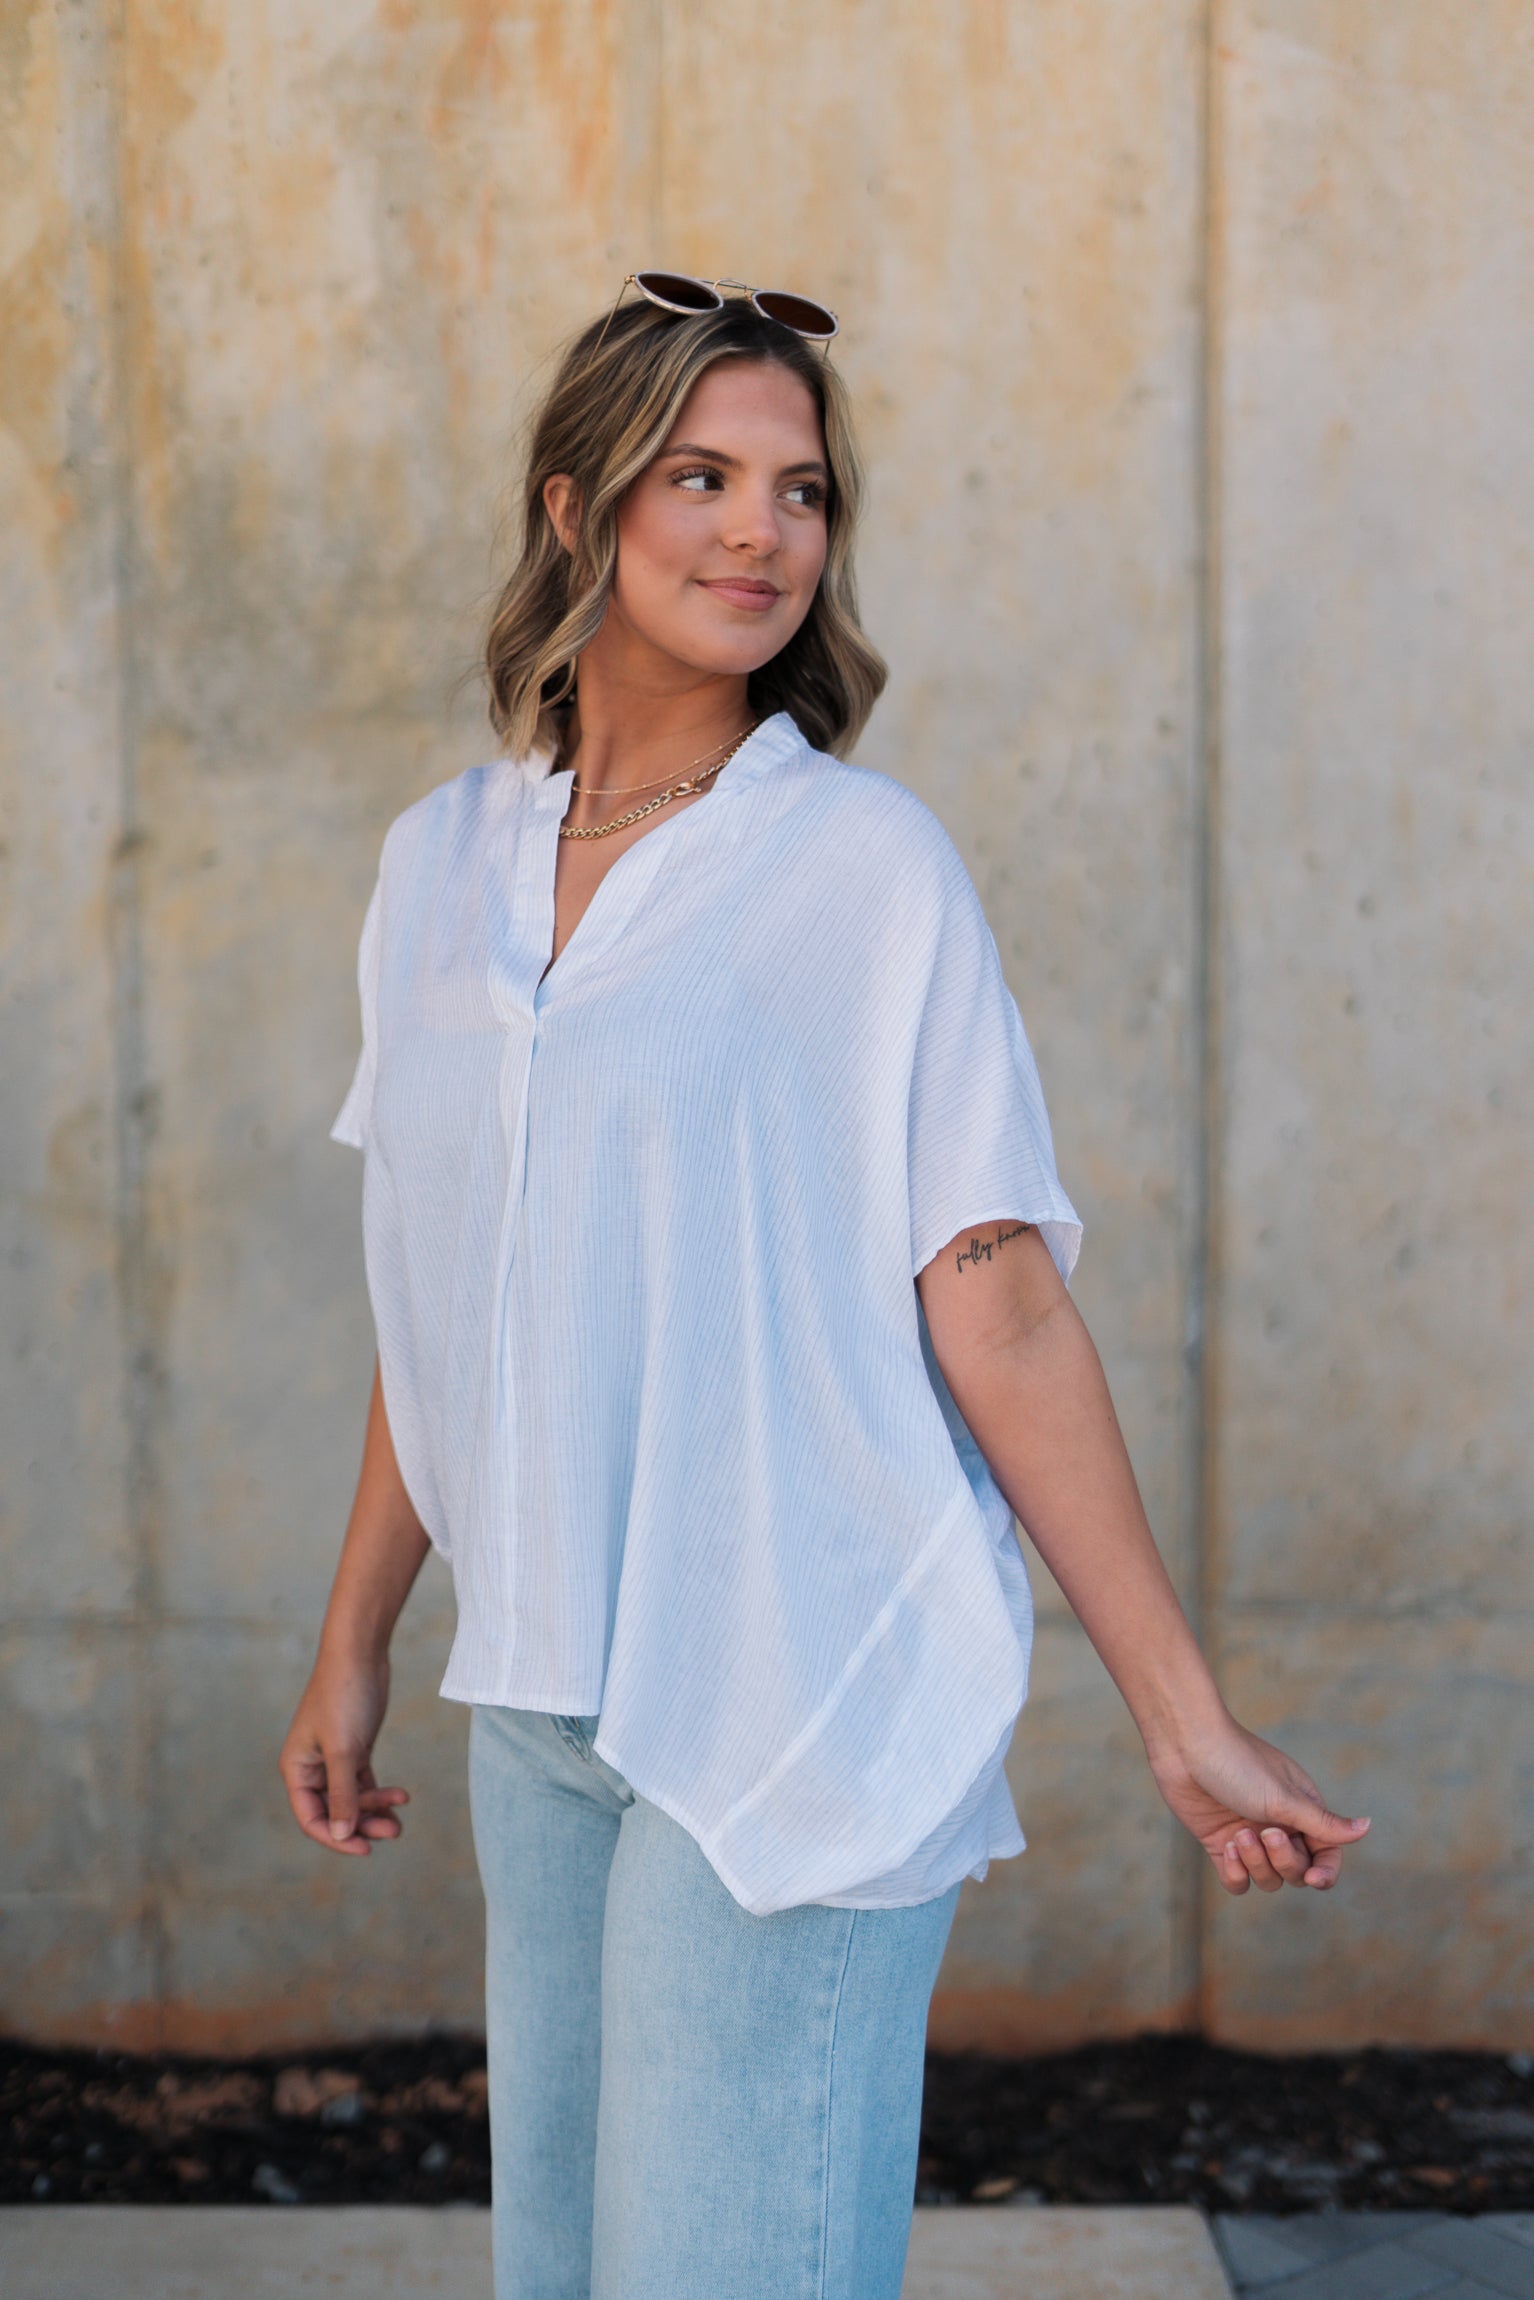 Frontal side view of female model wearing the Thea White Lightweight Top that has lightweight white fabric with subtle monochrome stripes, oversized fit, v neckline, and short batwing sleeves.